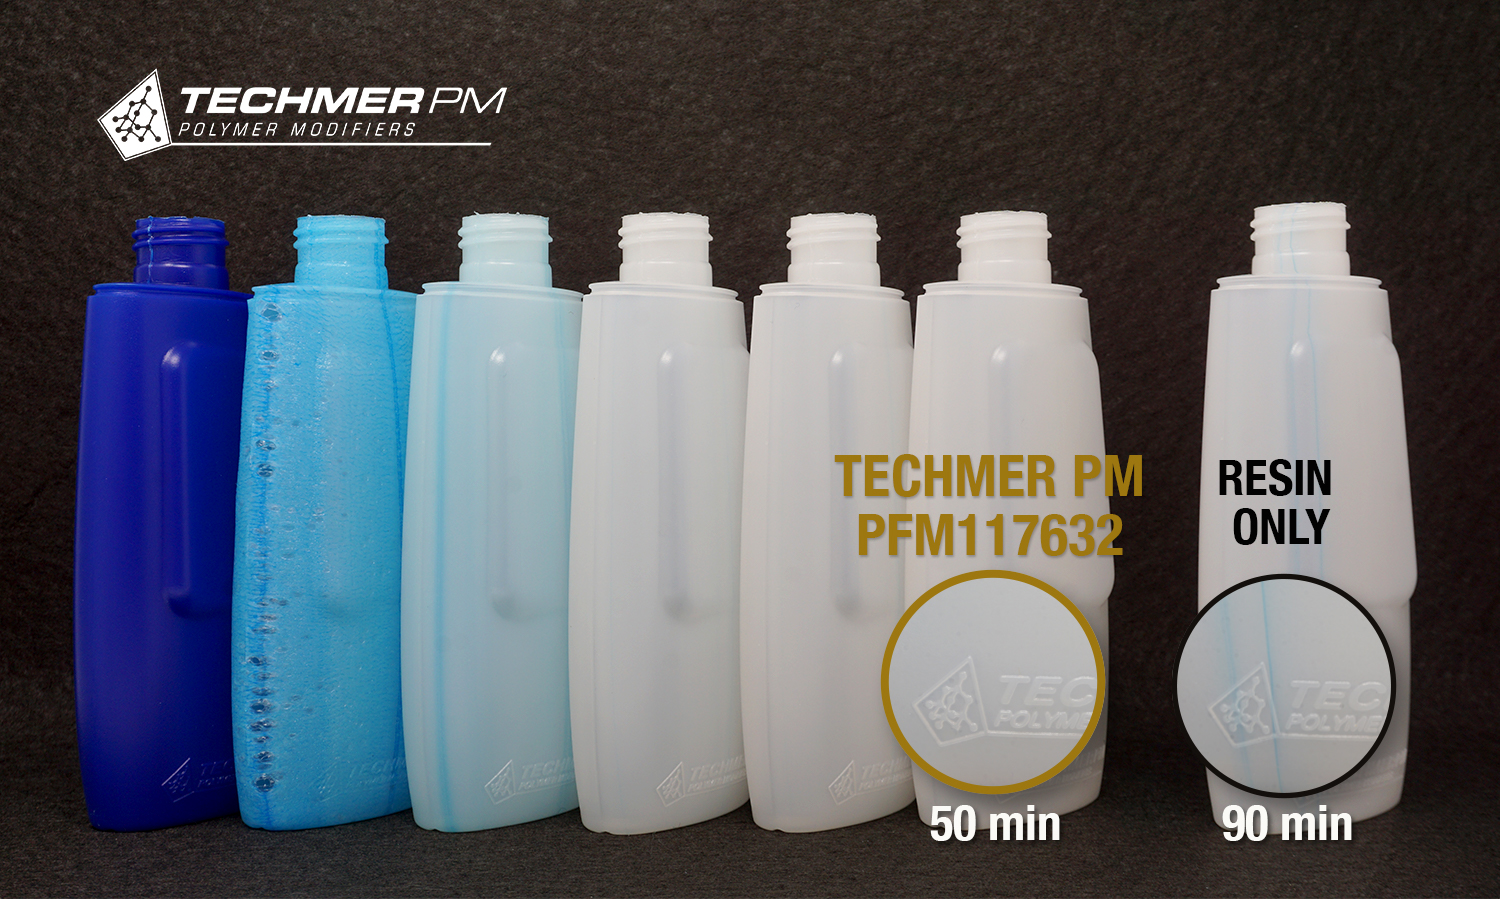 Techmer PM introduces highly effective new purging agent for blow molders